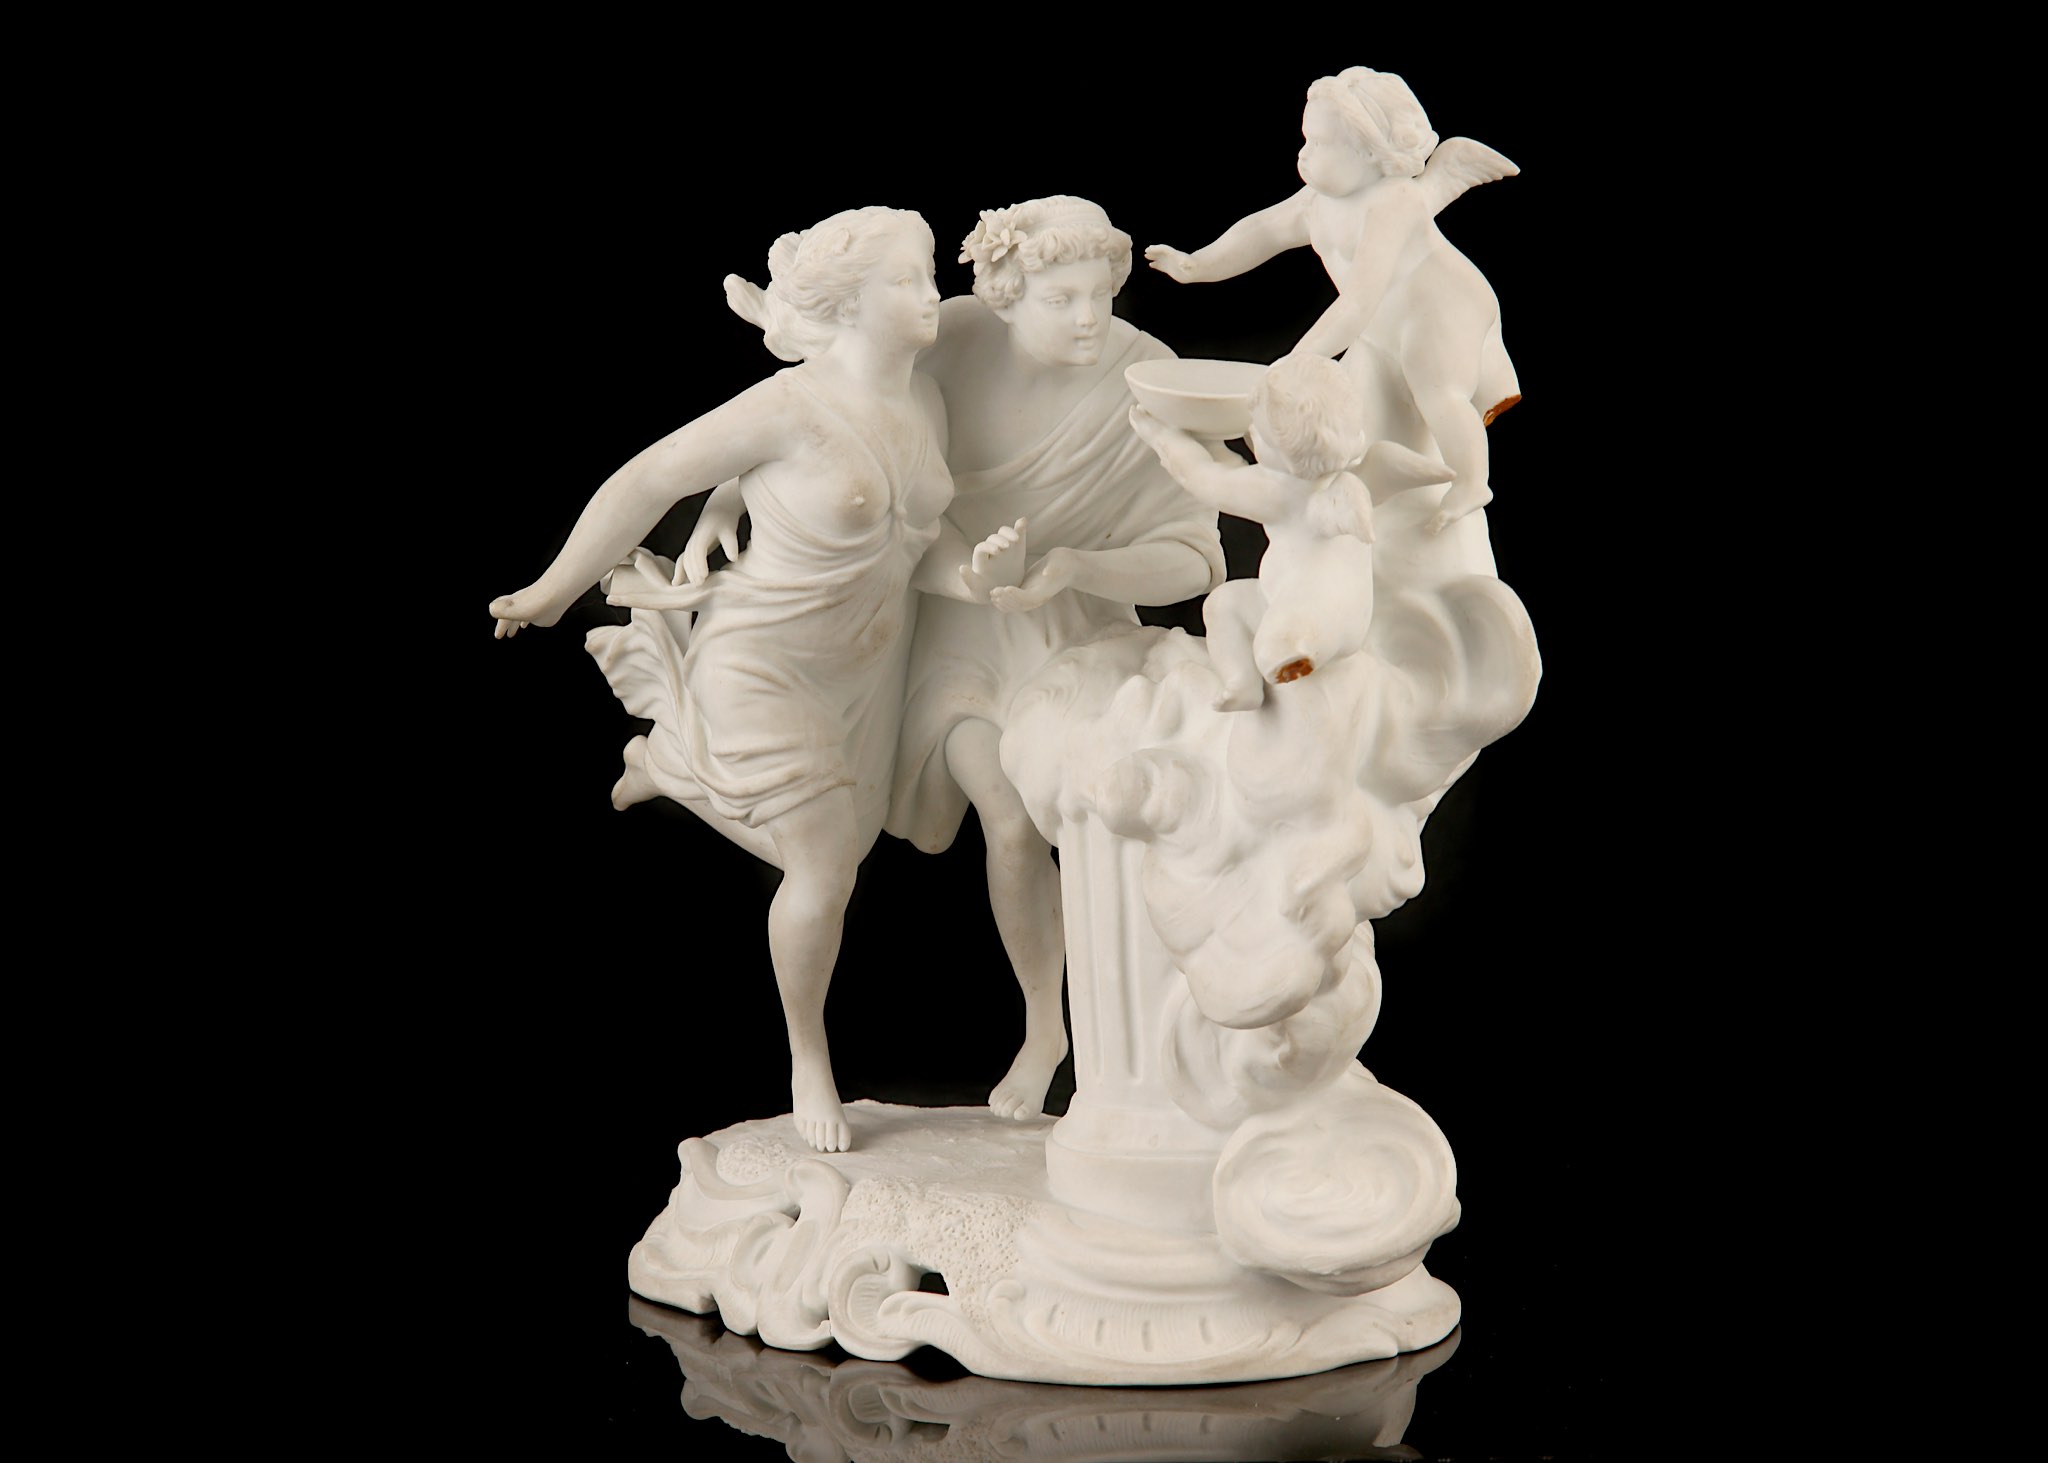 A SEVRES STYLE BISQUE PORCELAIN FIGURE GROUP OF 'THE FOUNTAIN OF LOVE', 19th century, after Jean- - Image 2 of 5